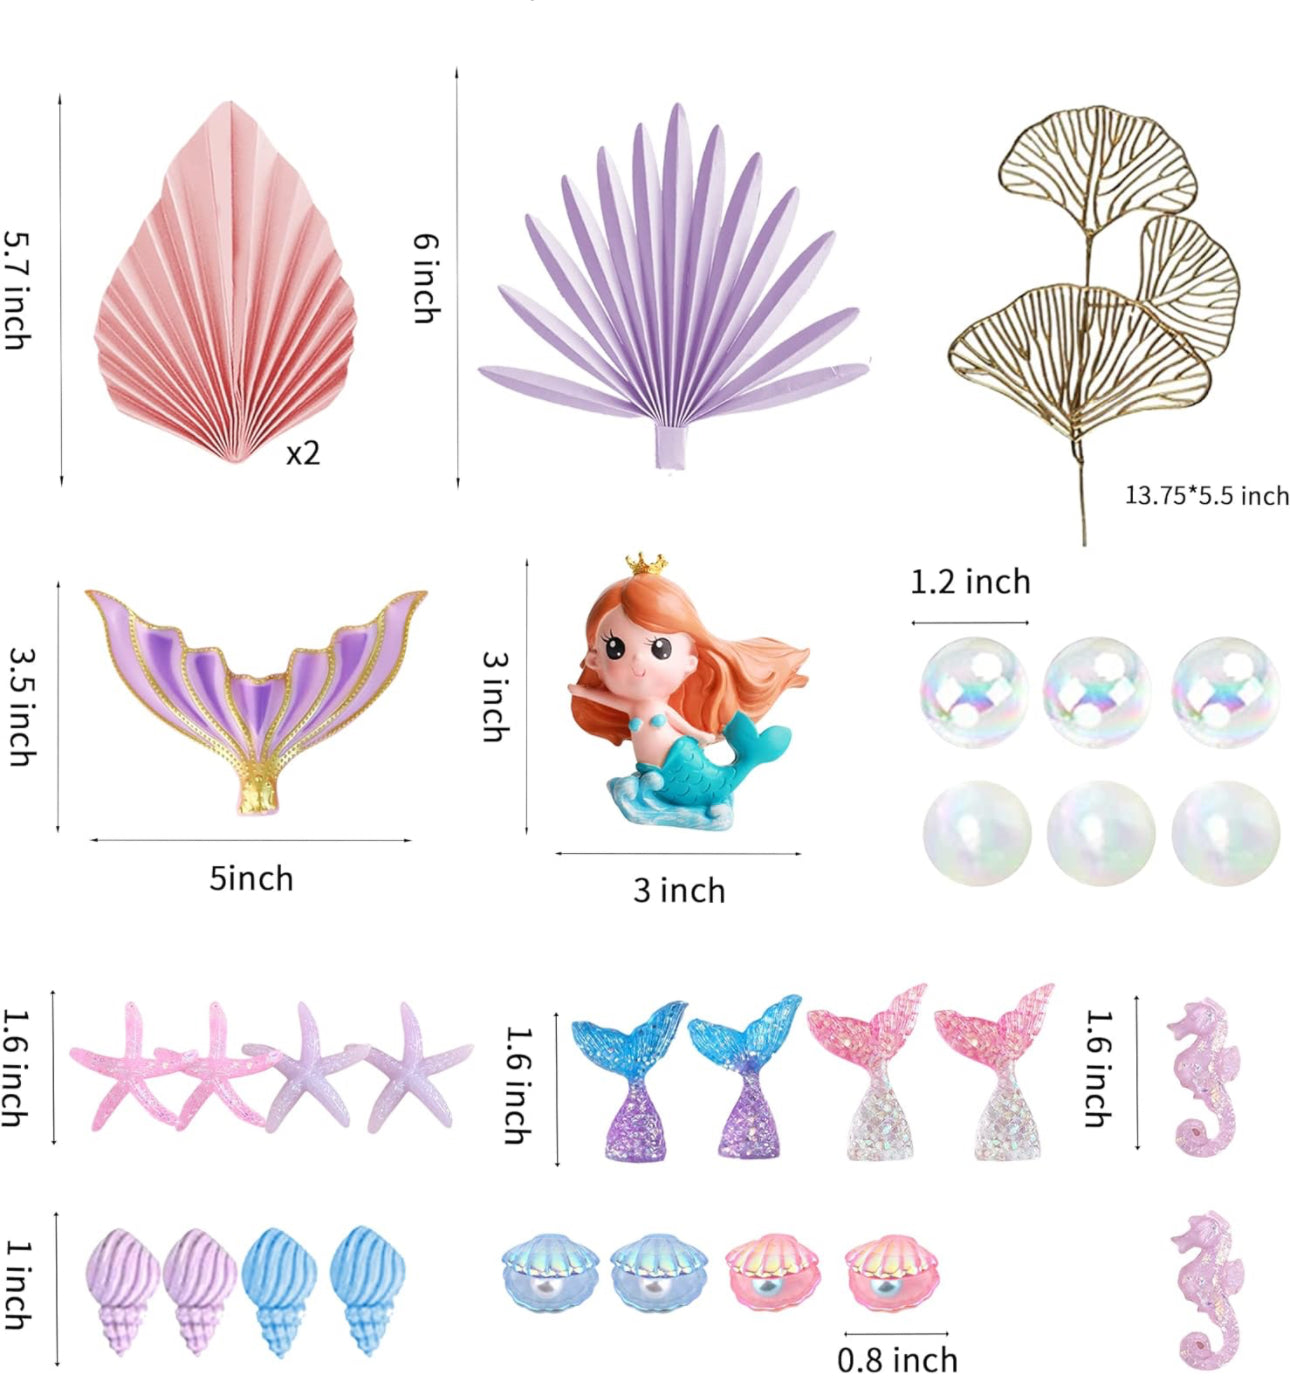 RASSLISA Mermaid Cake Toppers Under the Sea Mermaid Tail Cake Decorations for Birthday Baby Shower Party Supplies